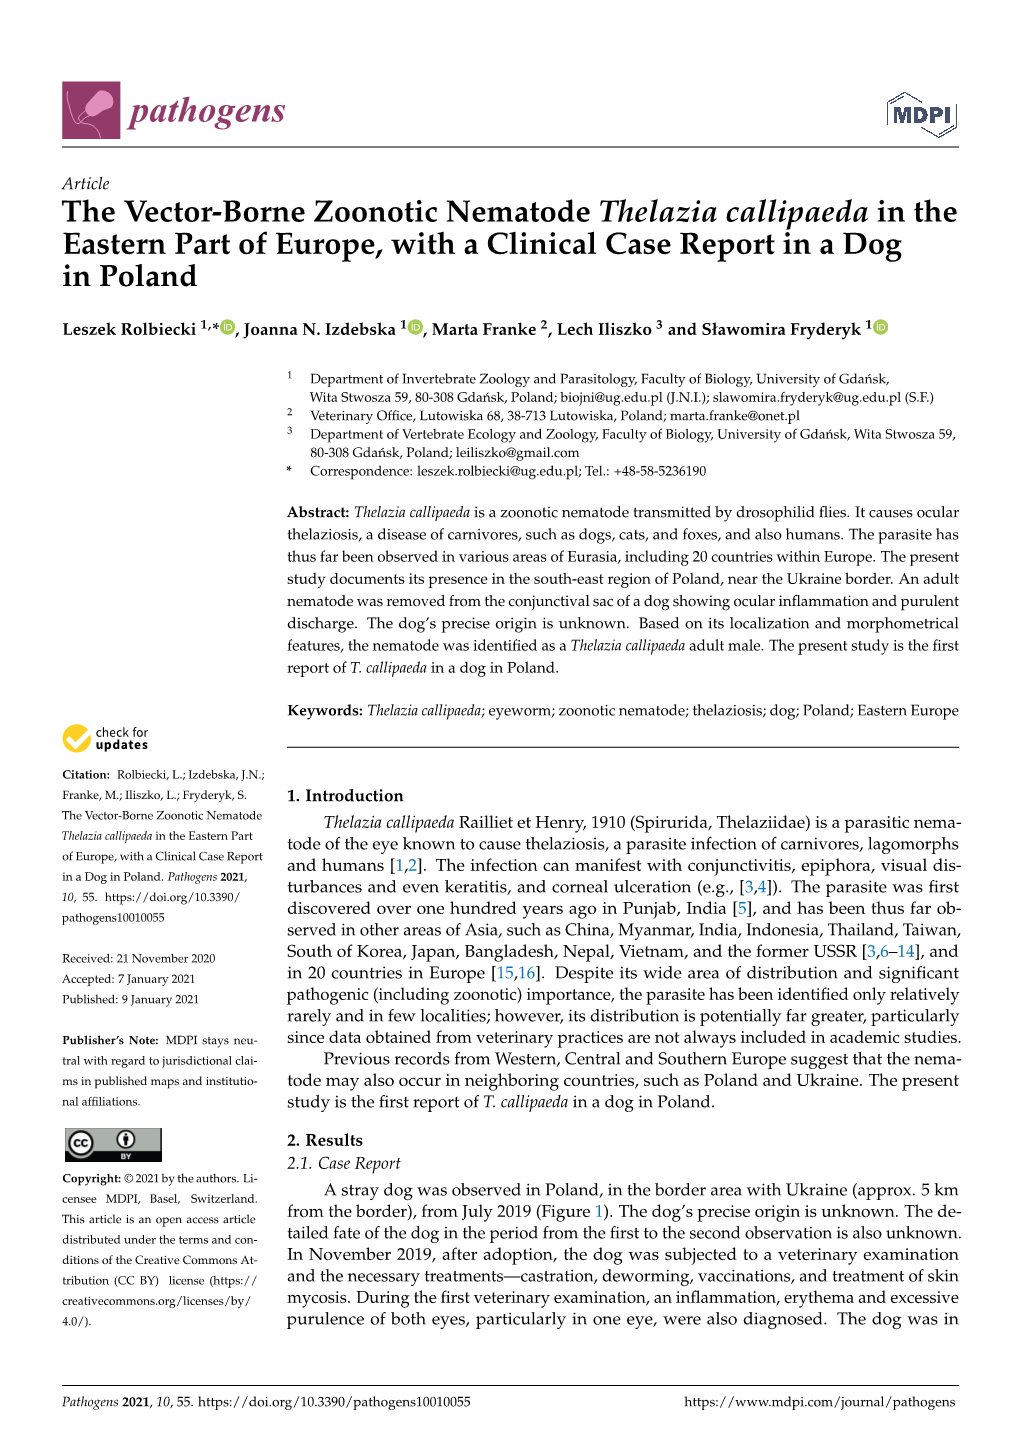 The Vector-Borne Zoonotic Nematode Thelazia Callipaeda in the Eastern Part of Europe, with a Clinical Case Report in a Dog in Poland